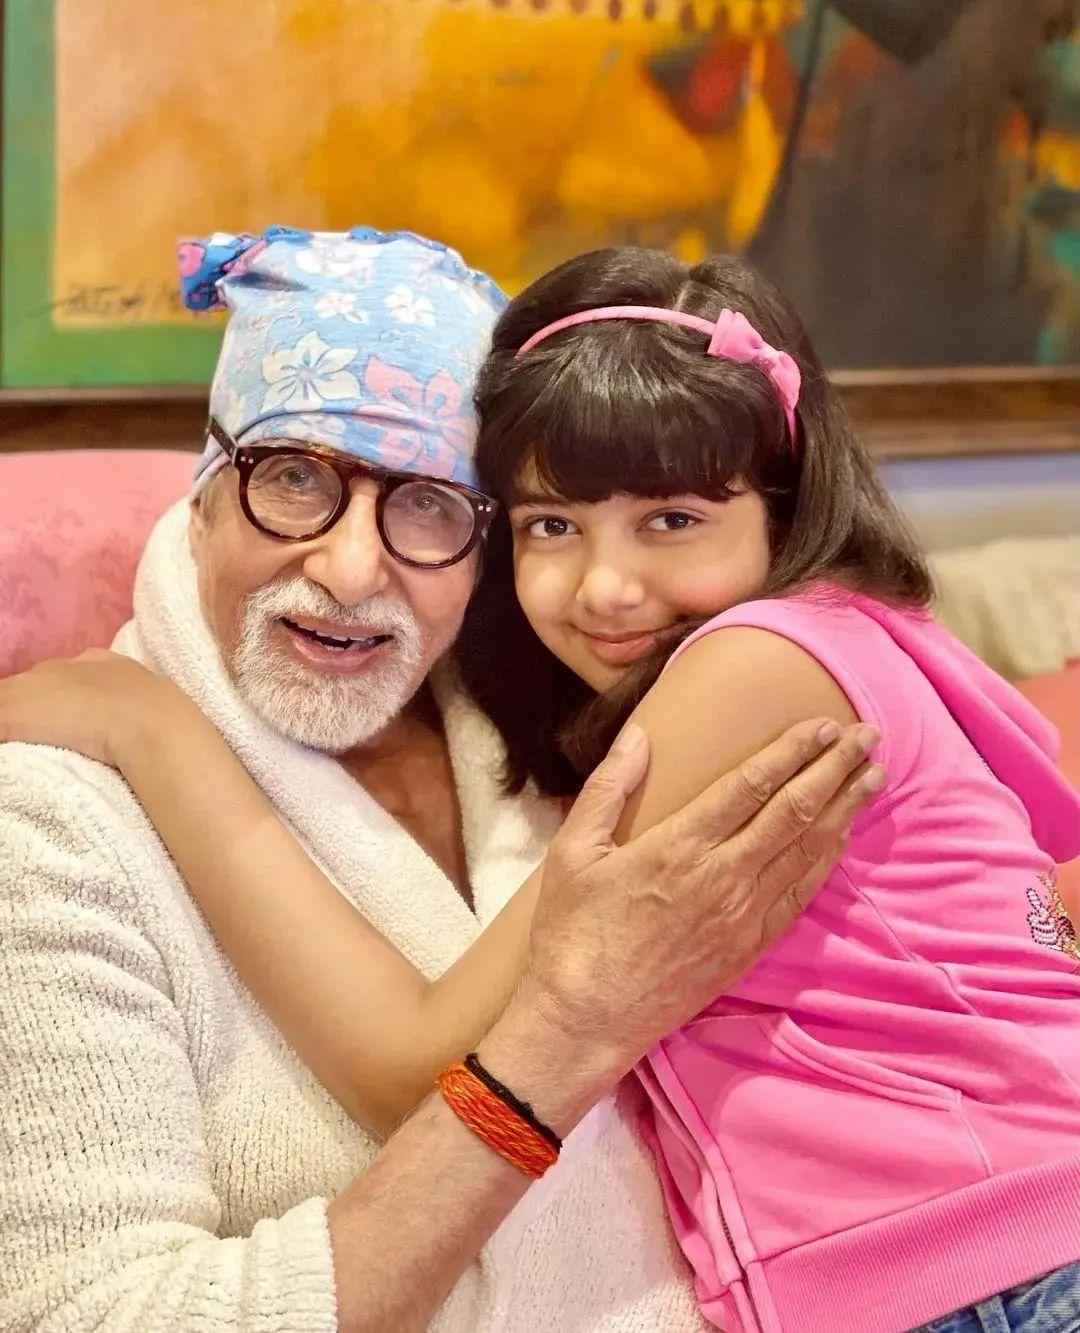 Lastly, the adorable eleven-year-old Aaradhya Bachchan, Abhishek, and Aishwarya's daughter, has already made appearances at major showbiz events, including the prestigious Cannes Film Festival.